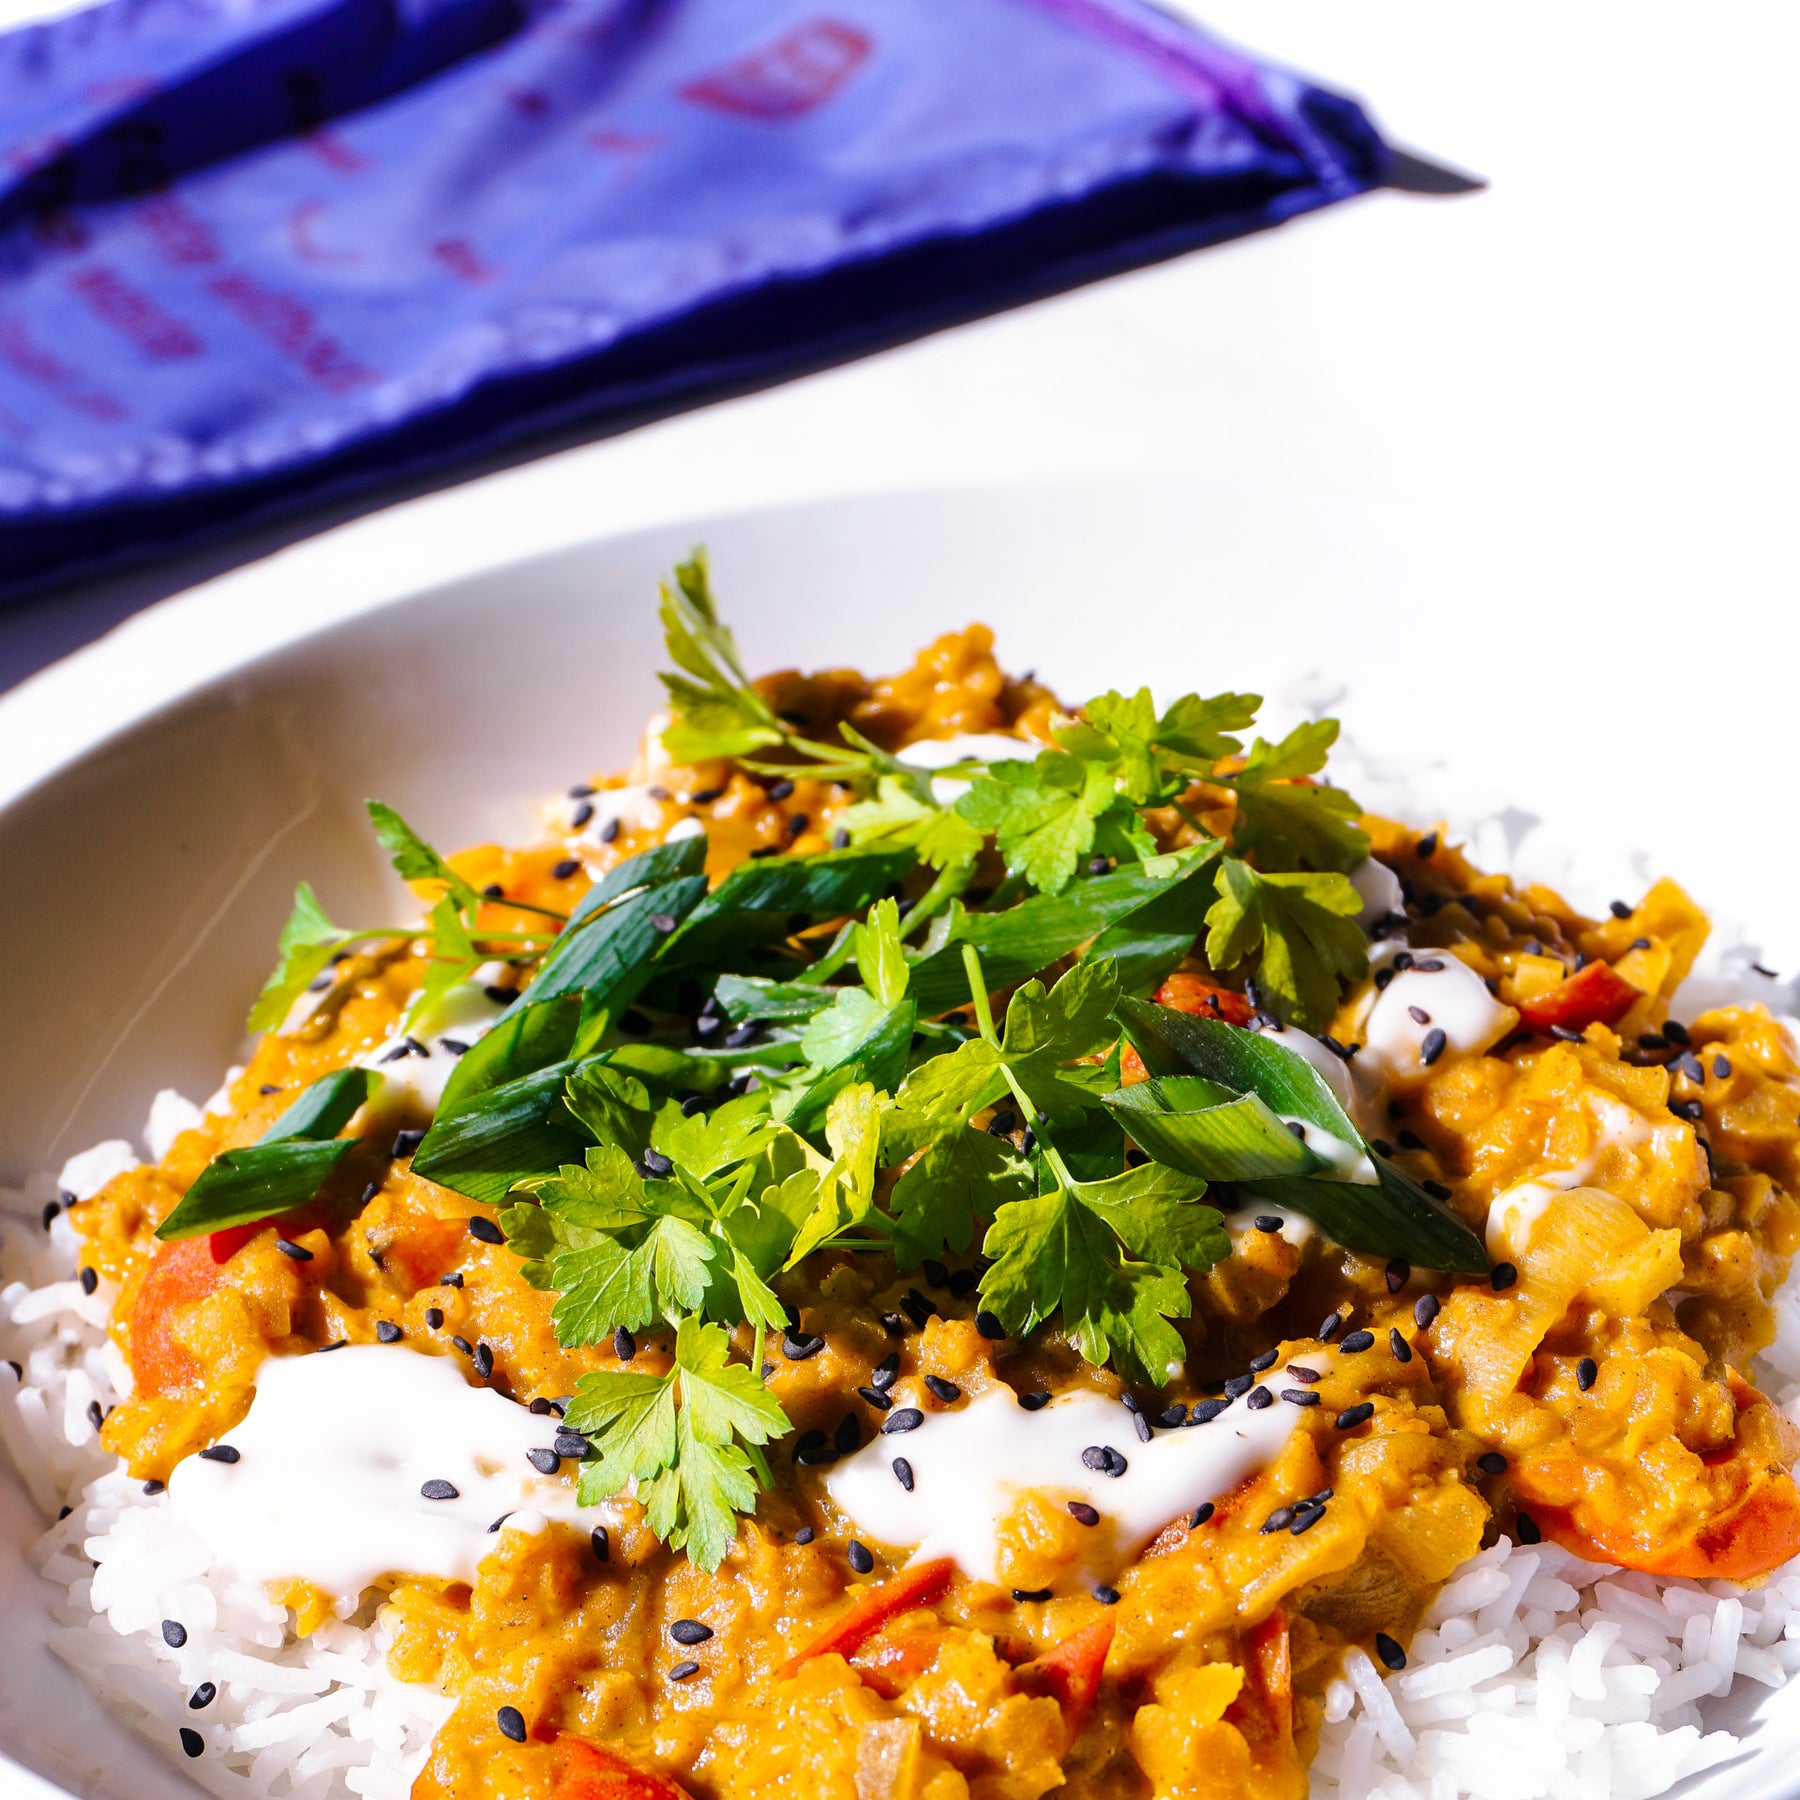 Dahl Curry & Rice "In a bag"